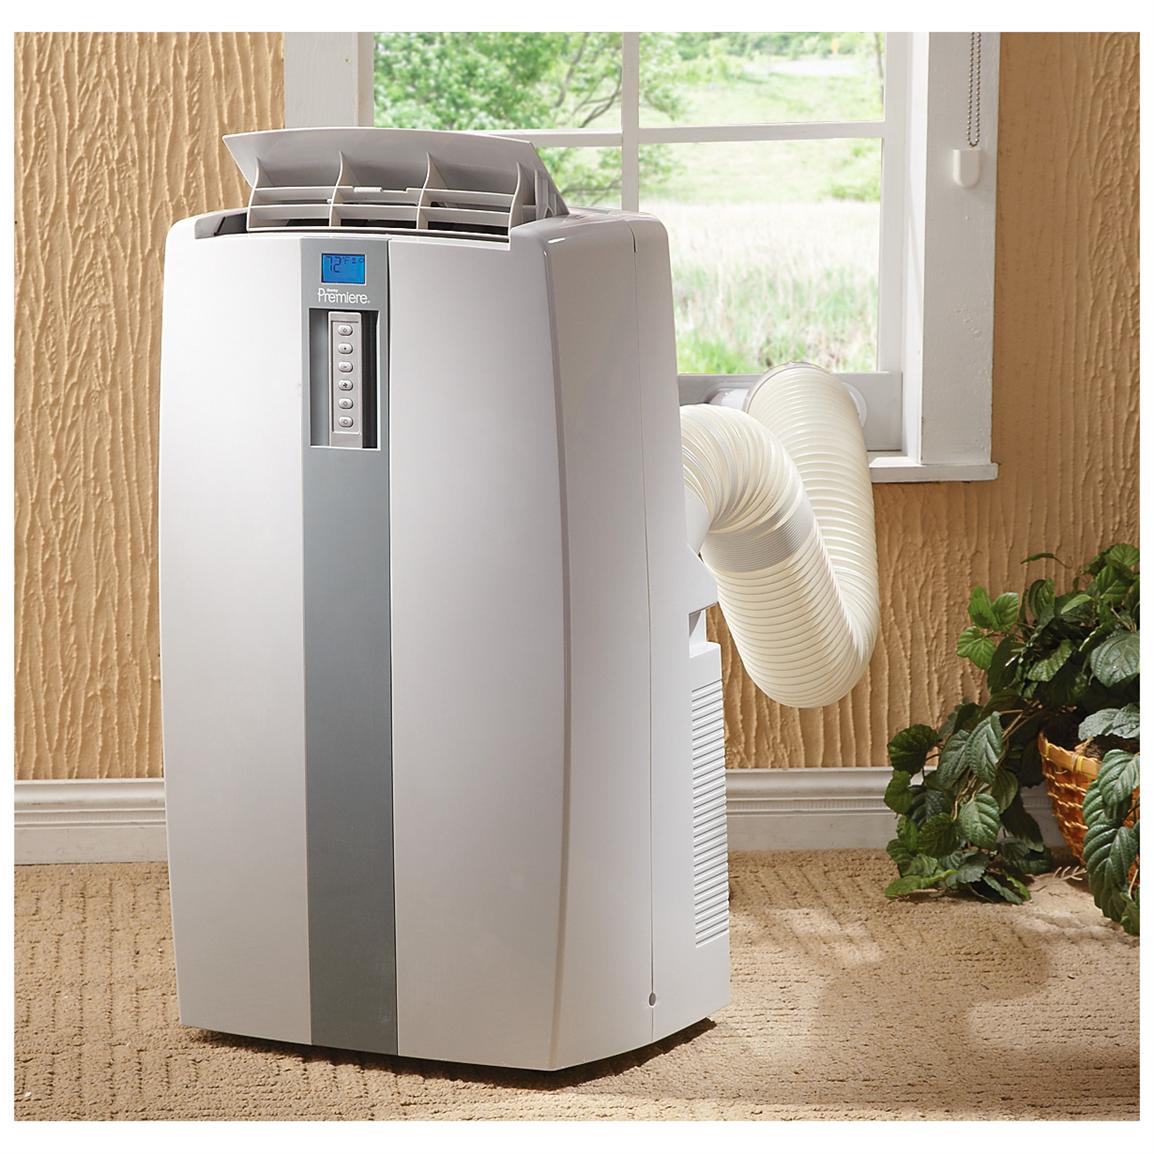 The Portable Air Conditioners Offer Some Terrific Options